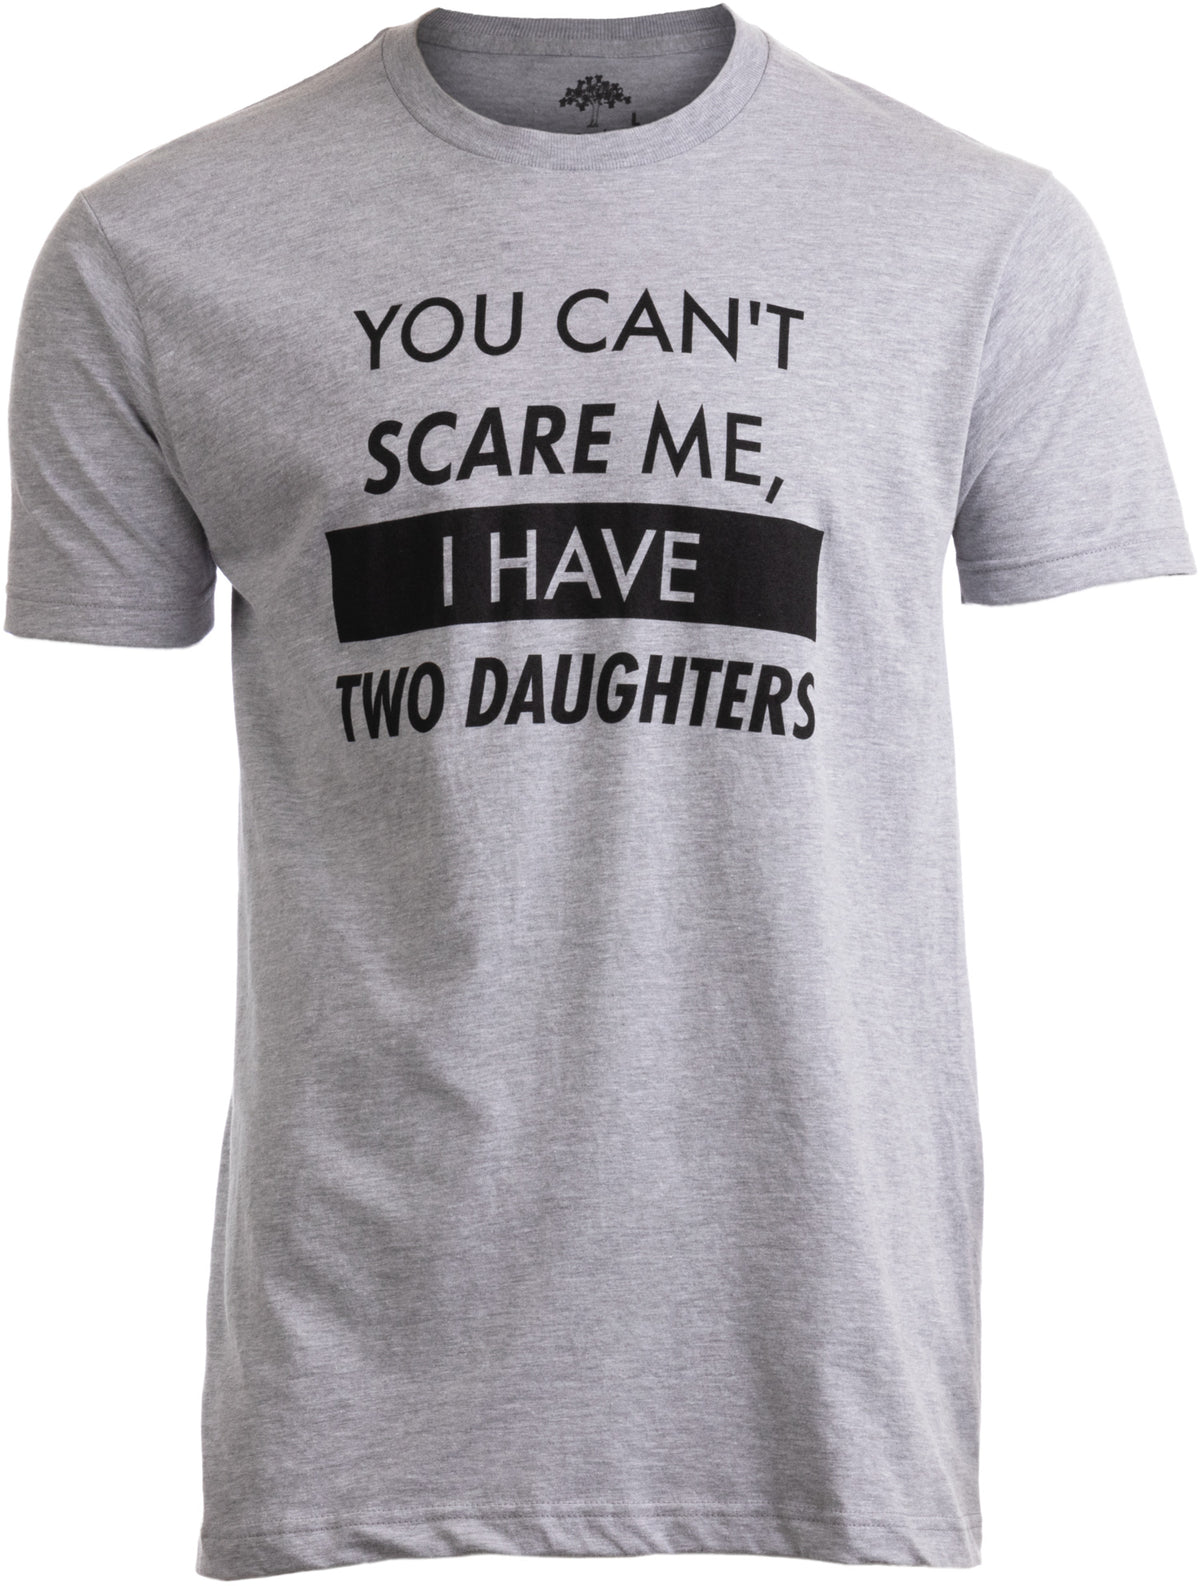 "You Can't Scare Me, I have Two Daughters" - Funny Dad Joke, Father T-shirt - Men's/Unisex